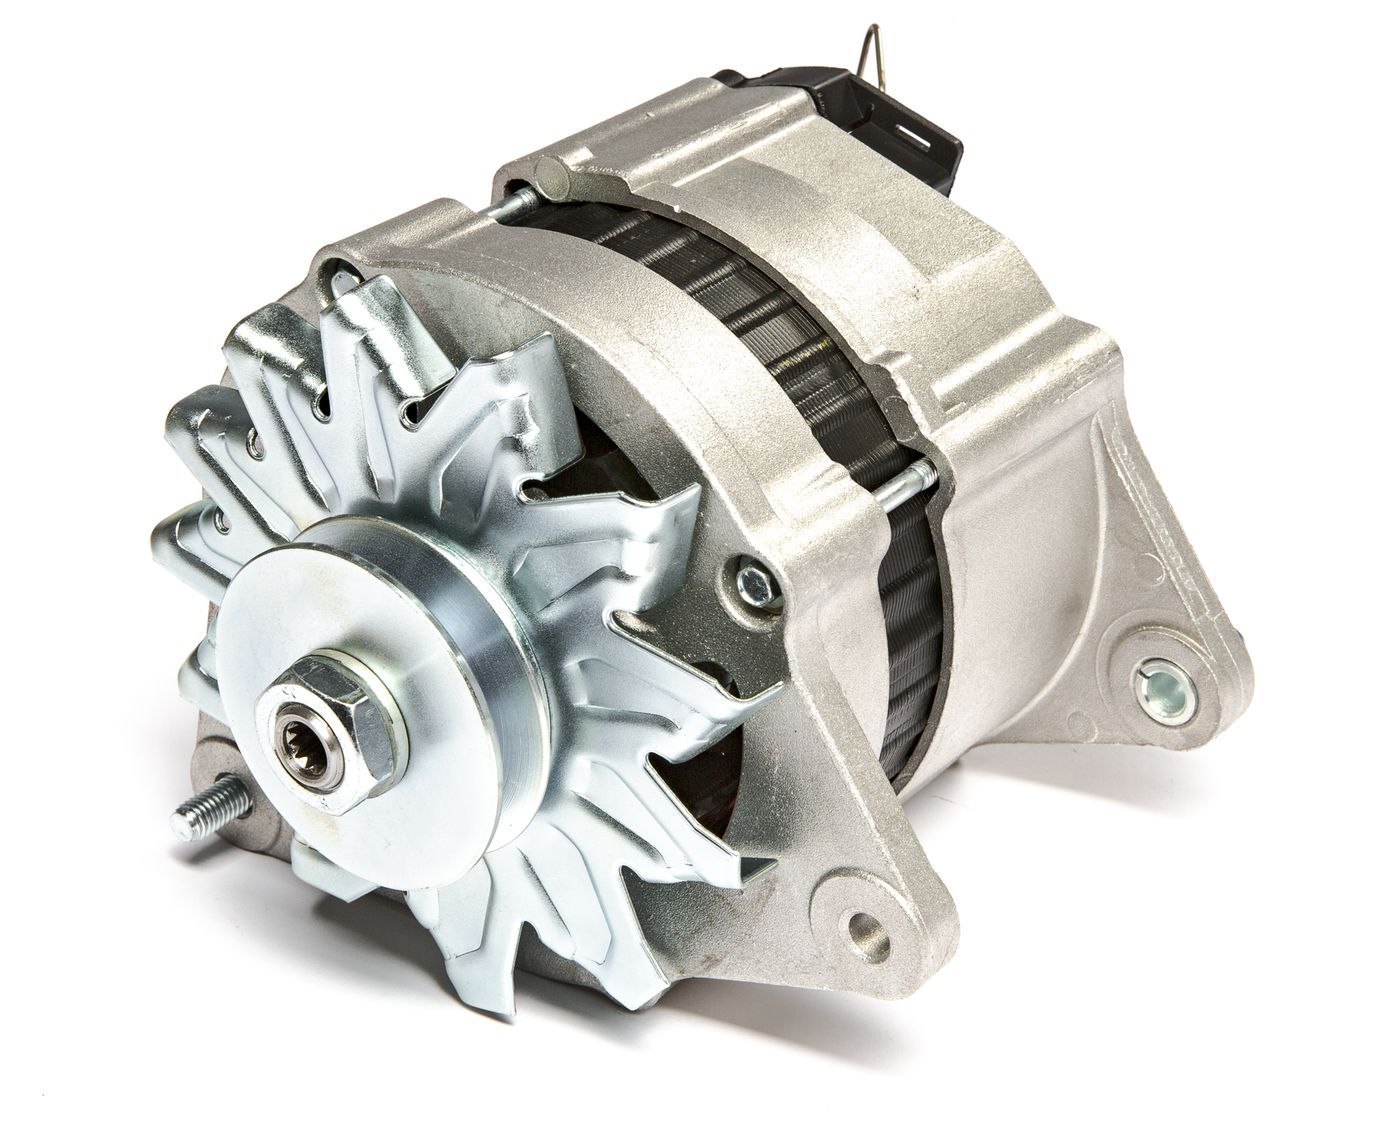 Alternator Conversion 80Amp, XKE 4.2 Ltr. 1965 - 1971 with or without Air Conditioning.